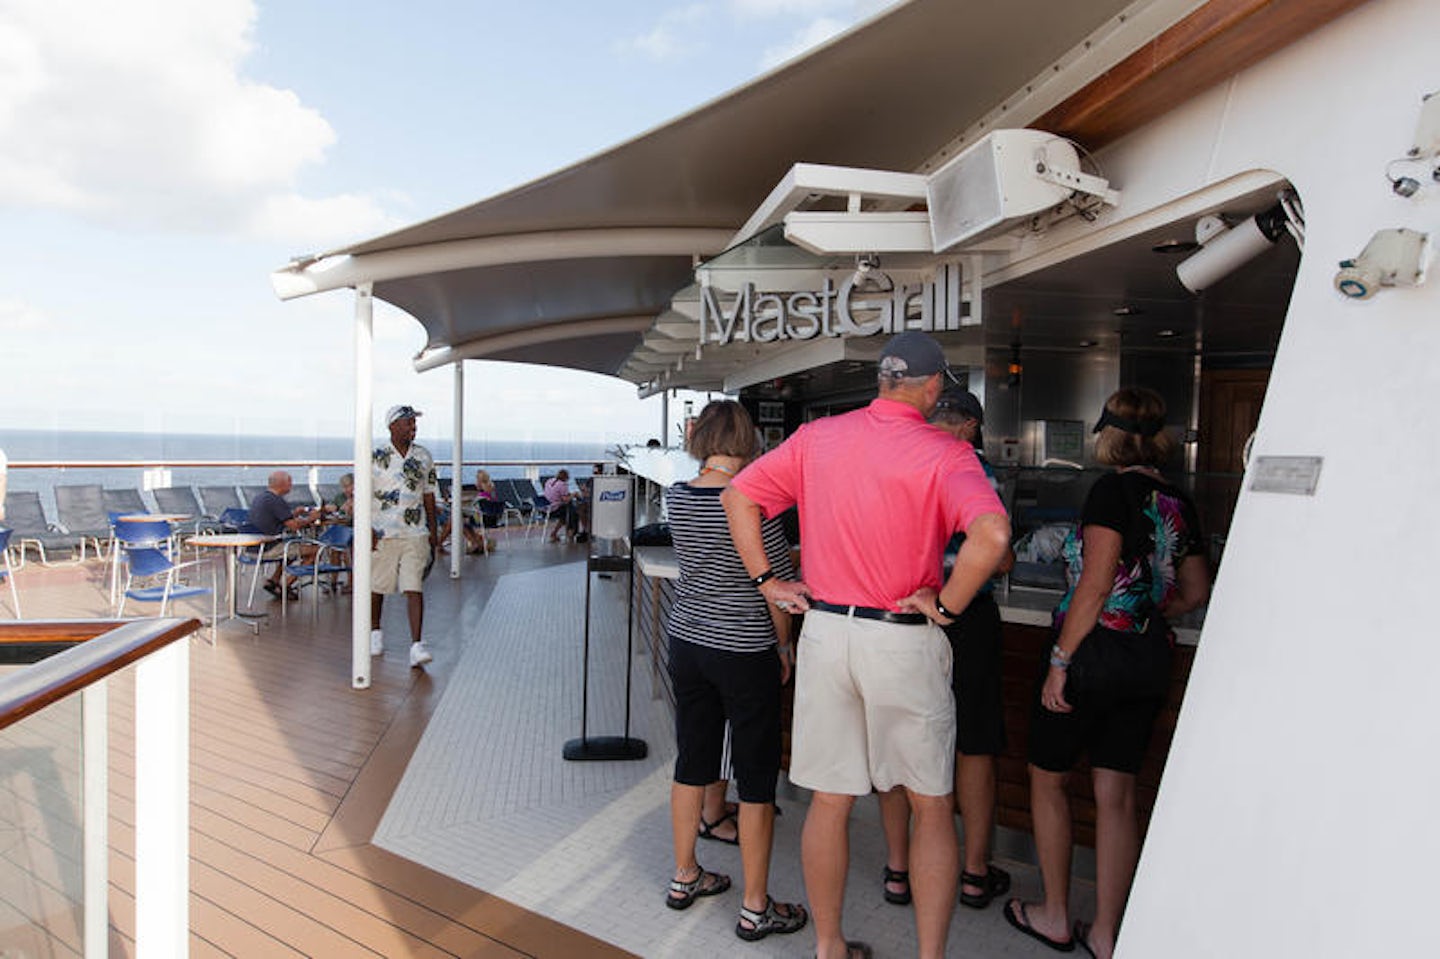 Mast Grill on Celebrity Silhouette